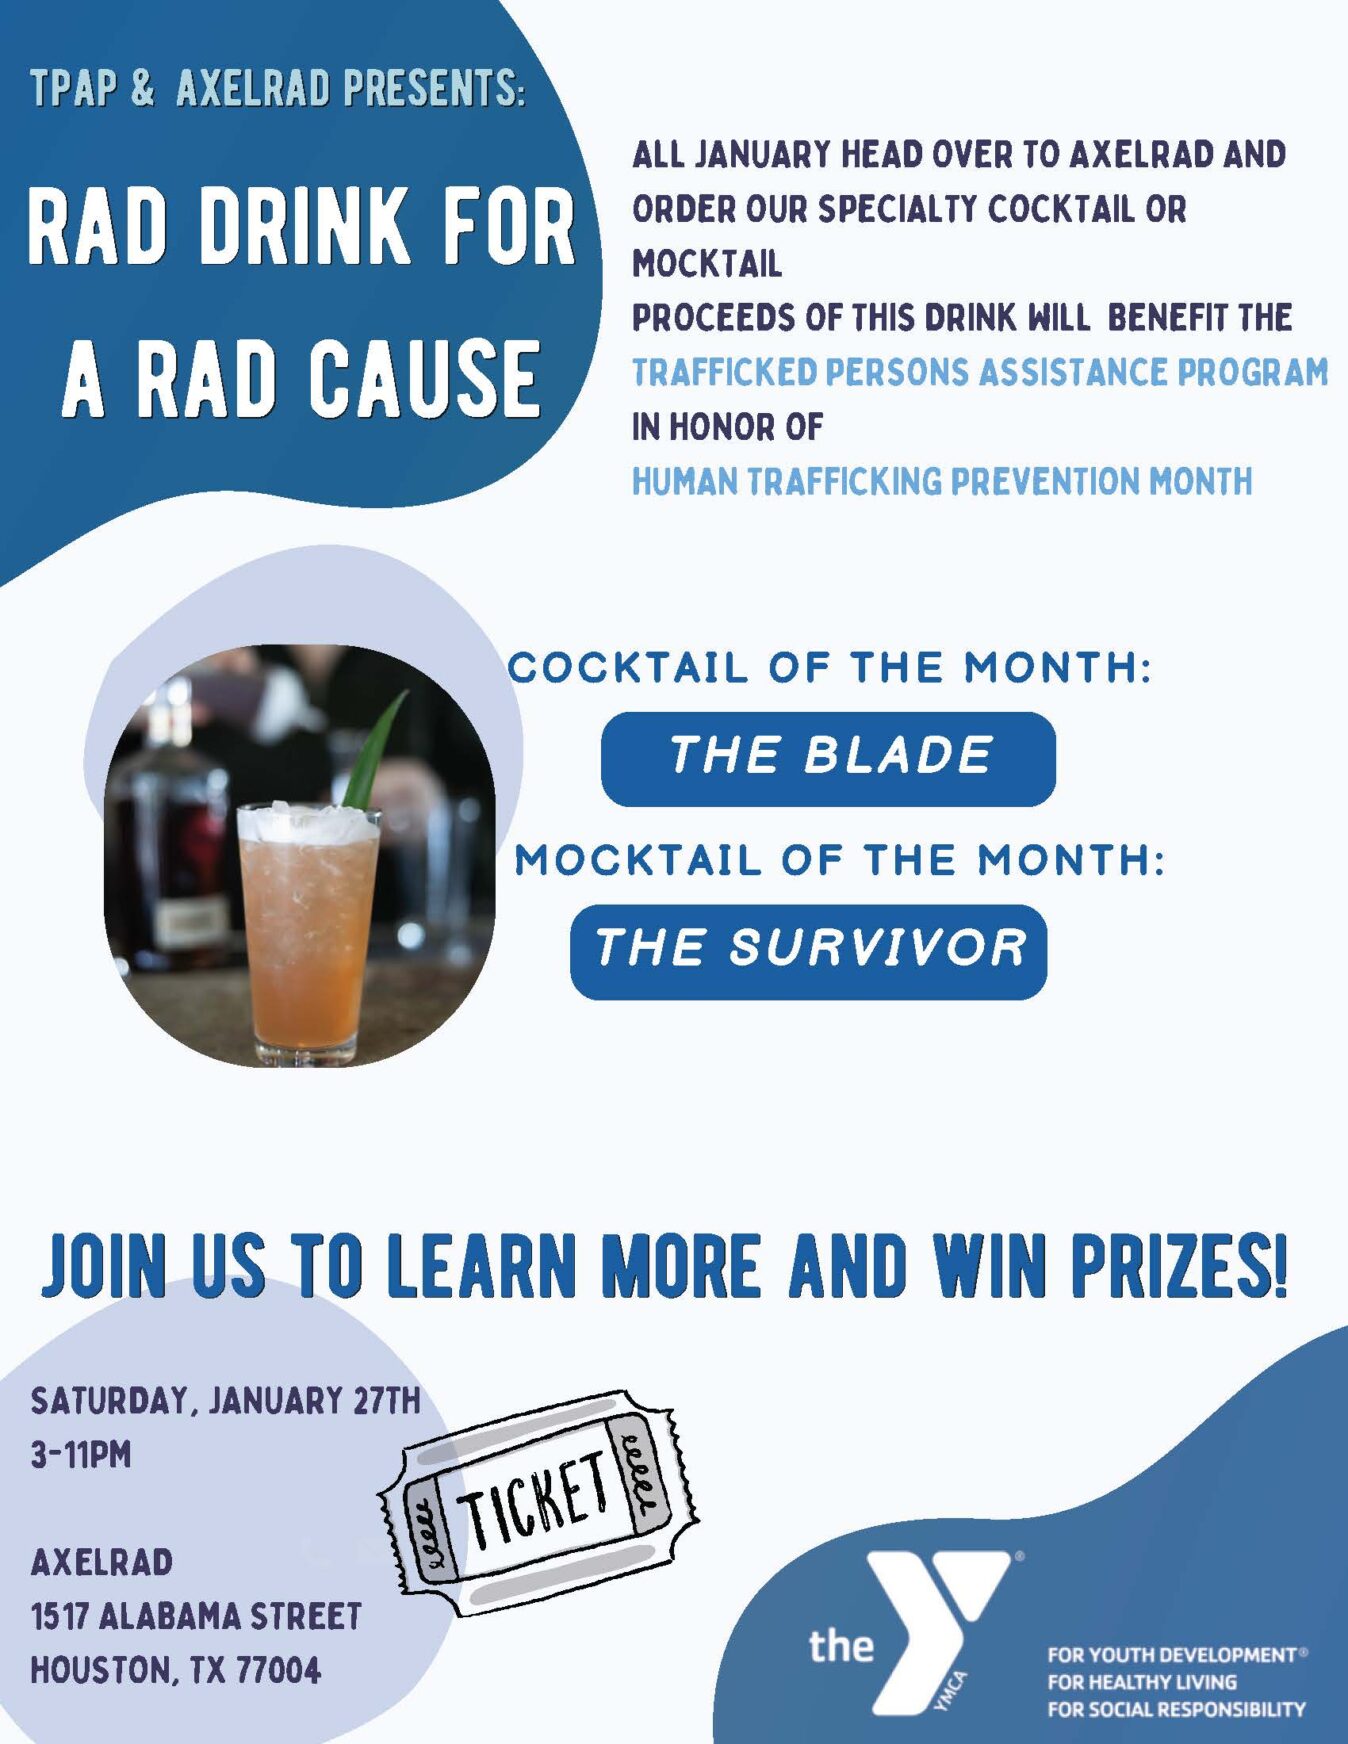 Rad Drink For A Rad Cause